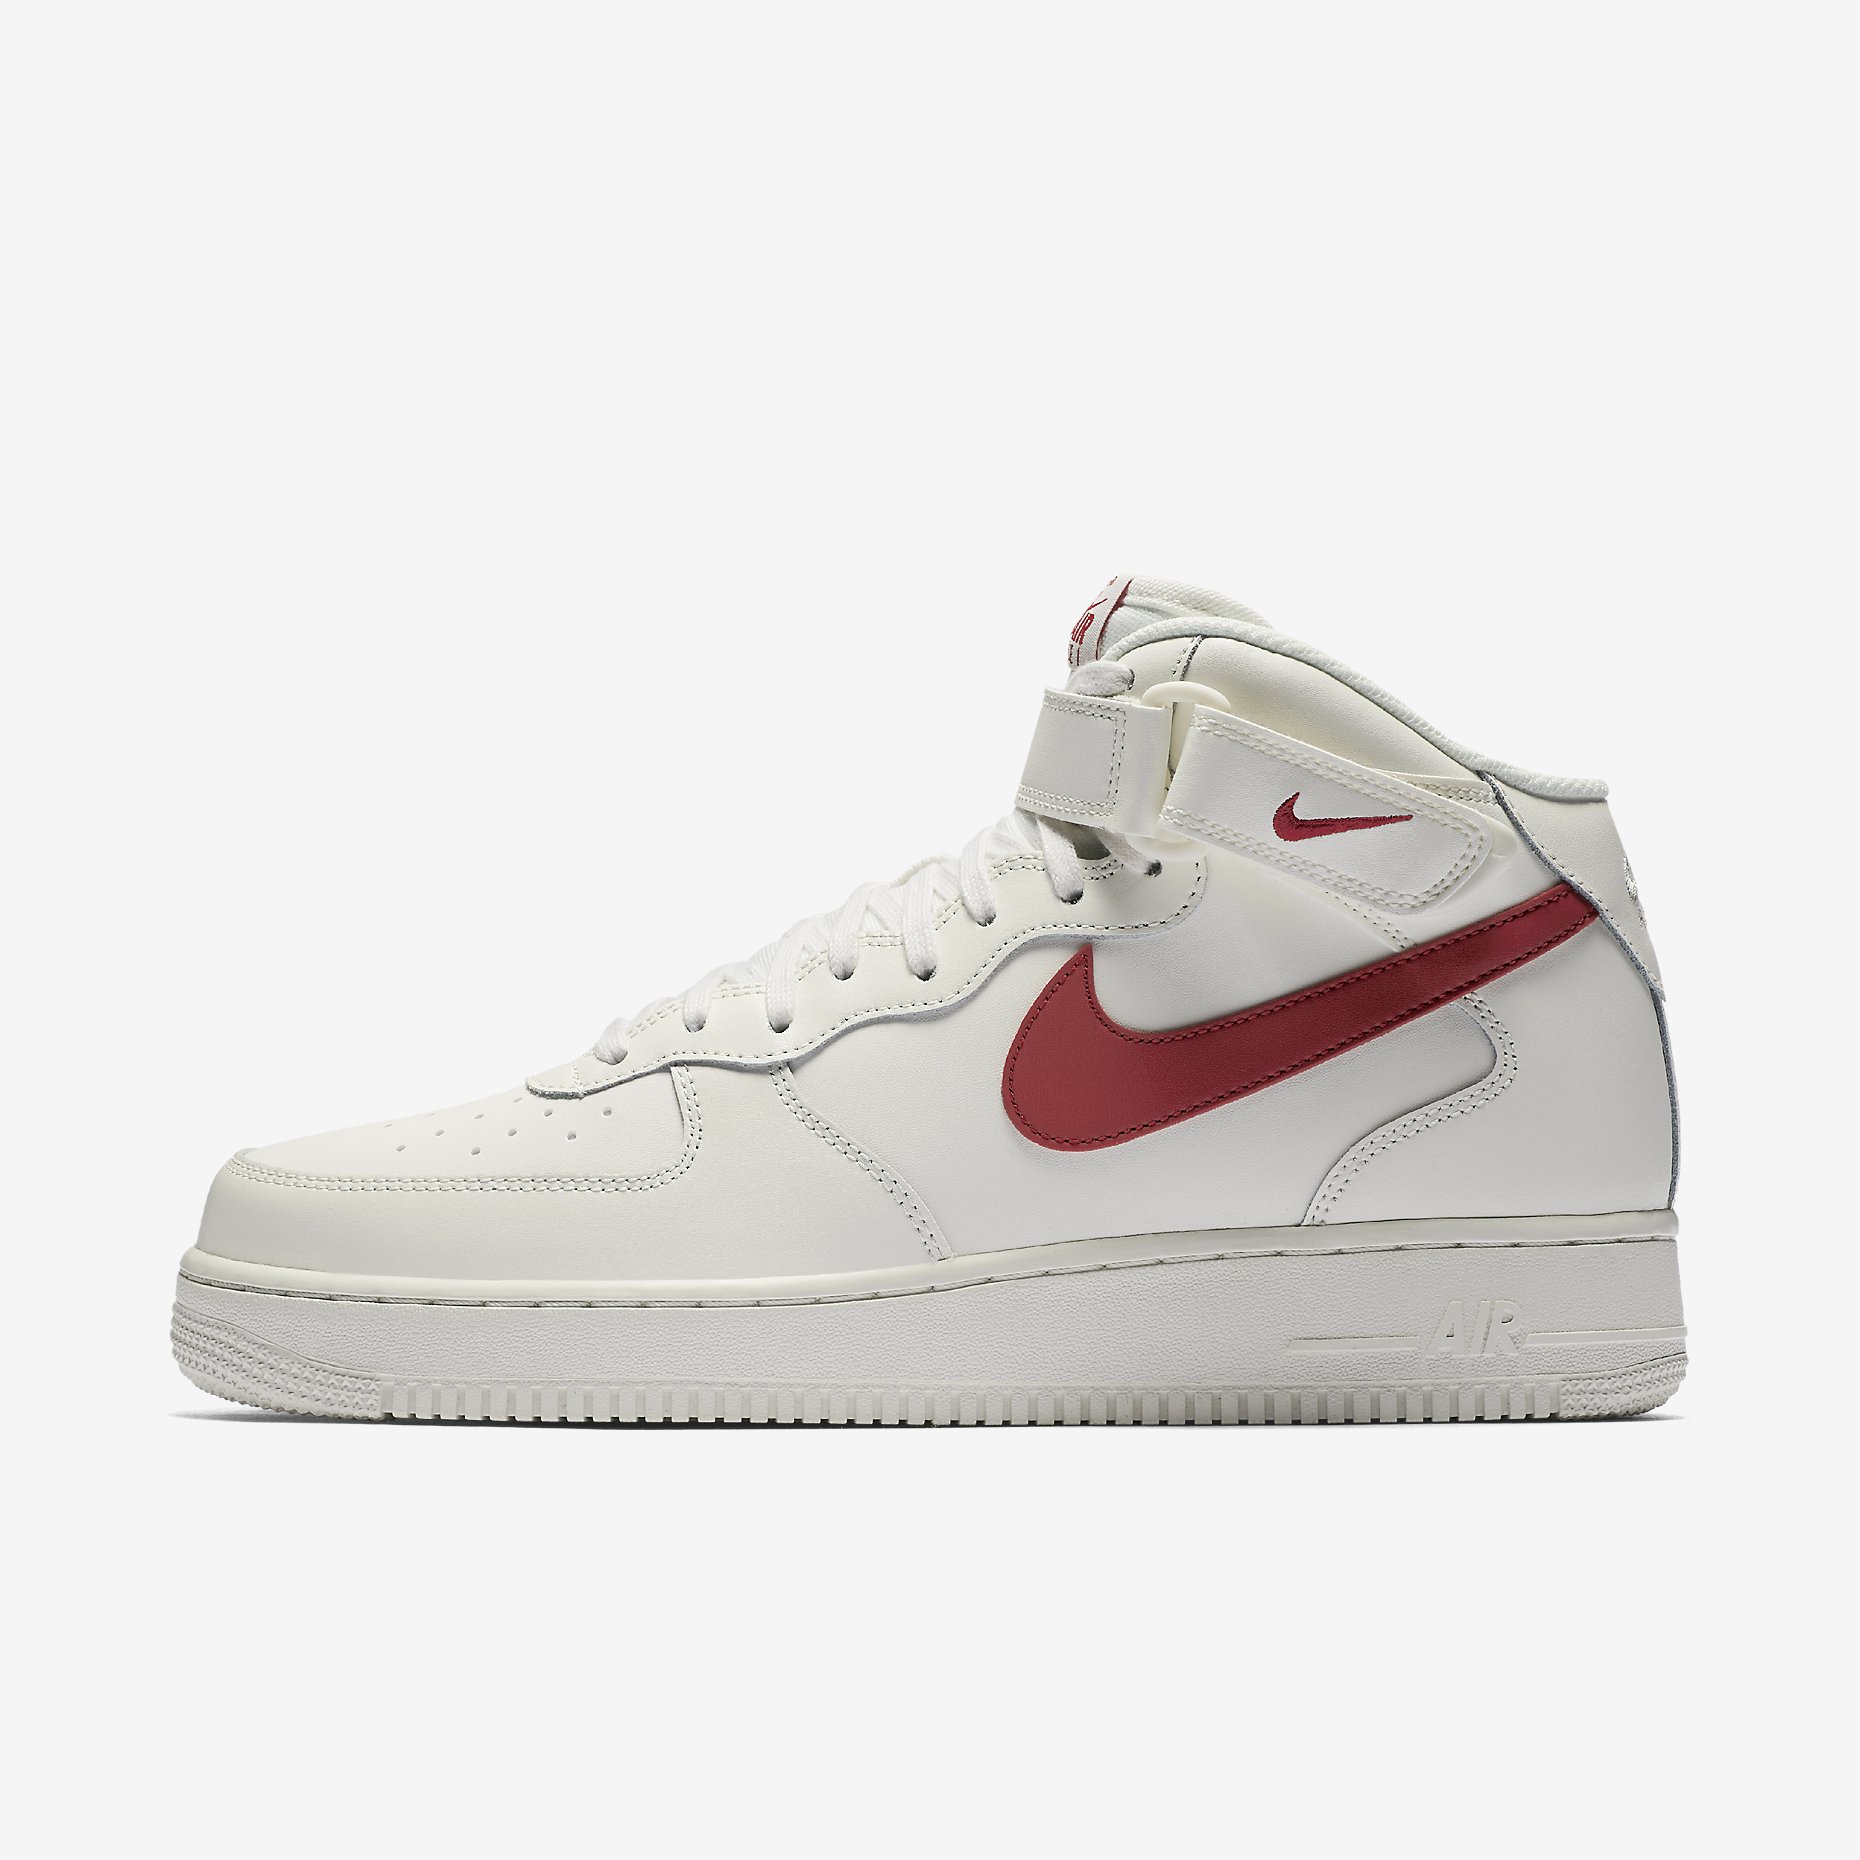 nike-air-force-1-mid-07-sail-university-red-2